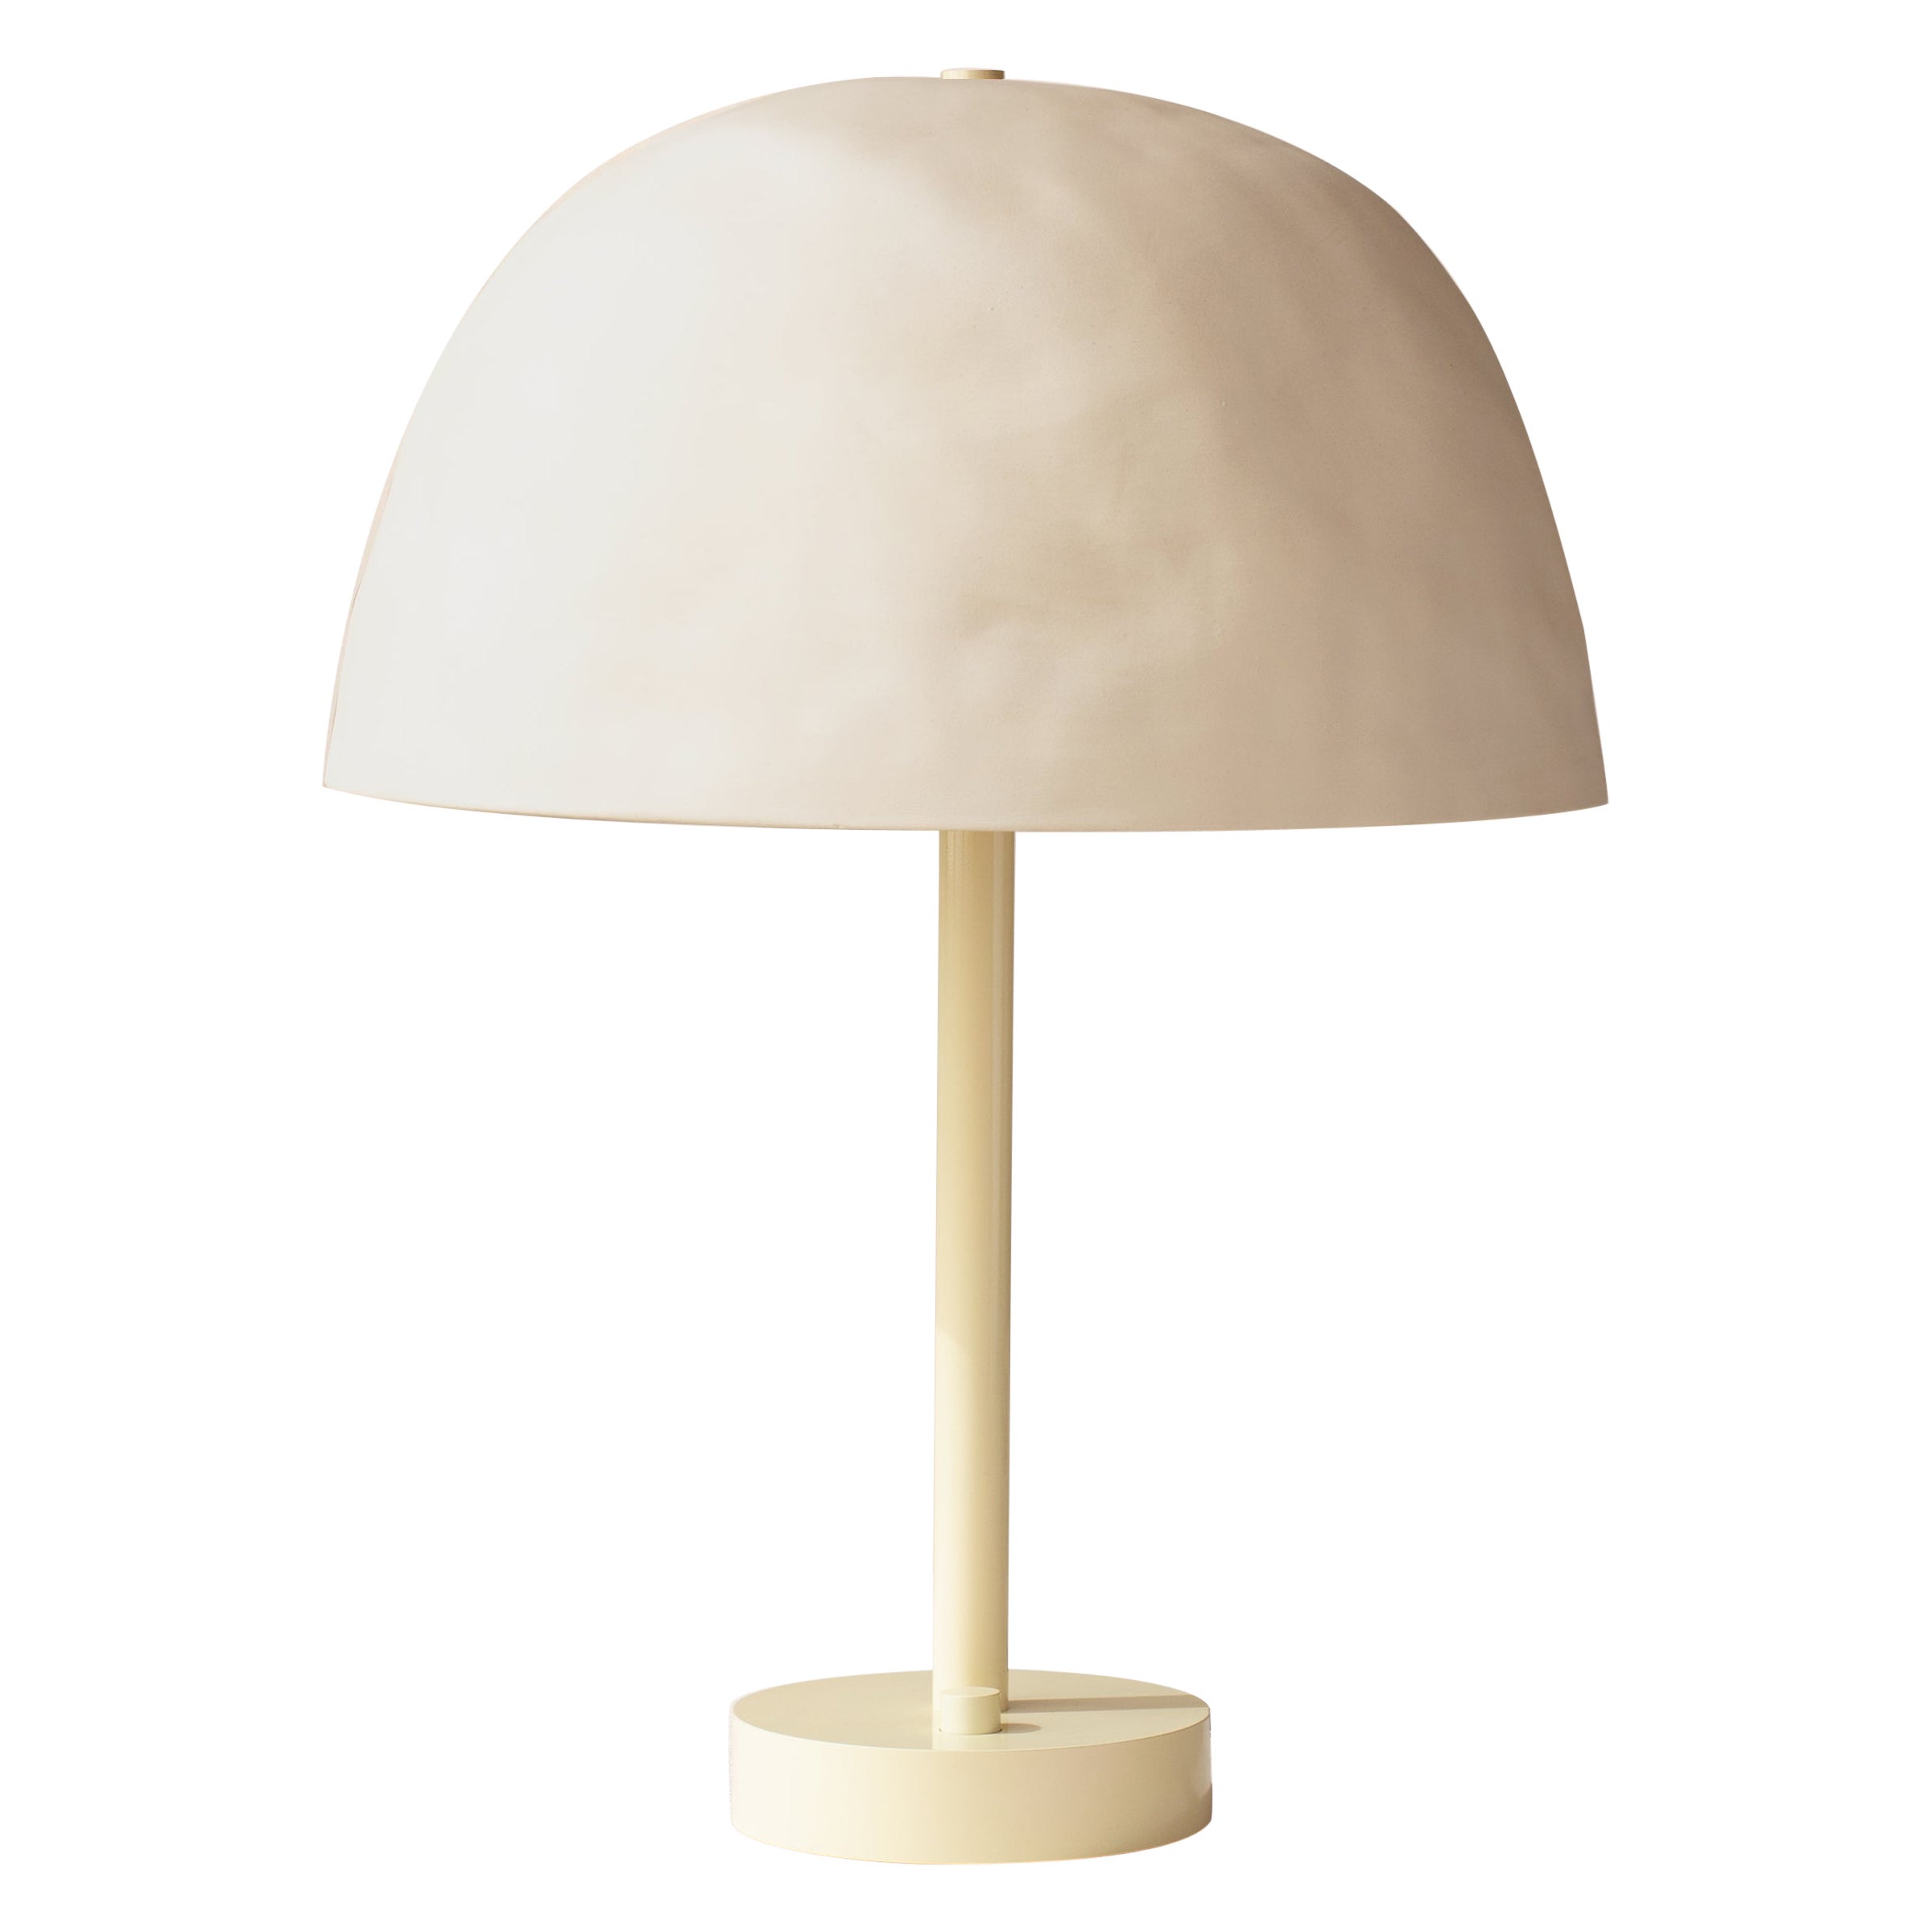 Dome Table Lamp by in Common with W/ Customizable Shade and Painted Steel Base